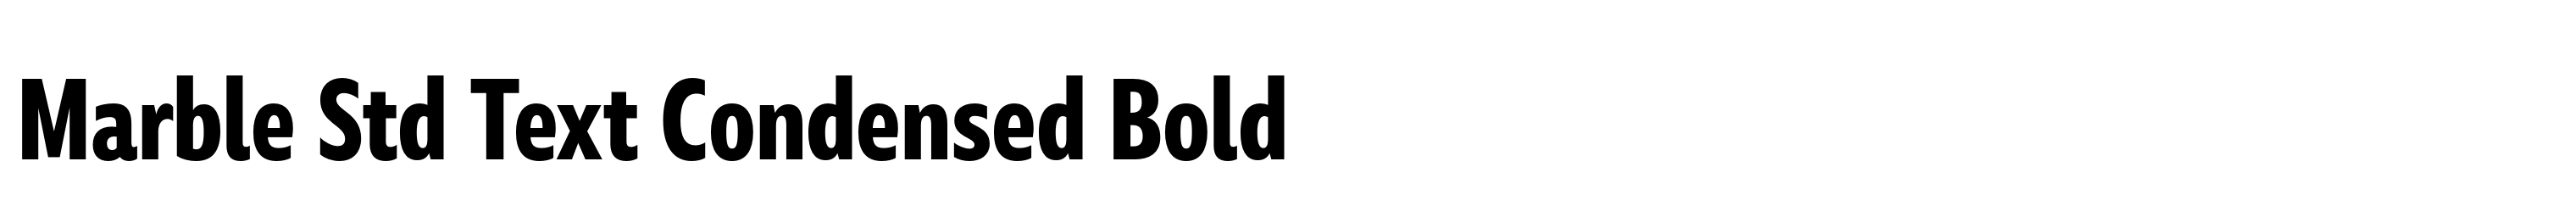 Marble Std Text Condensed Bold